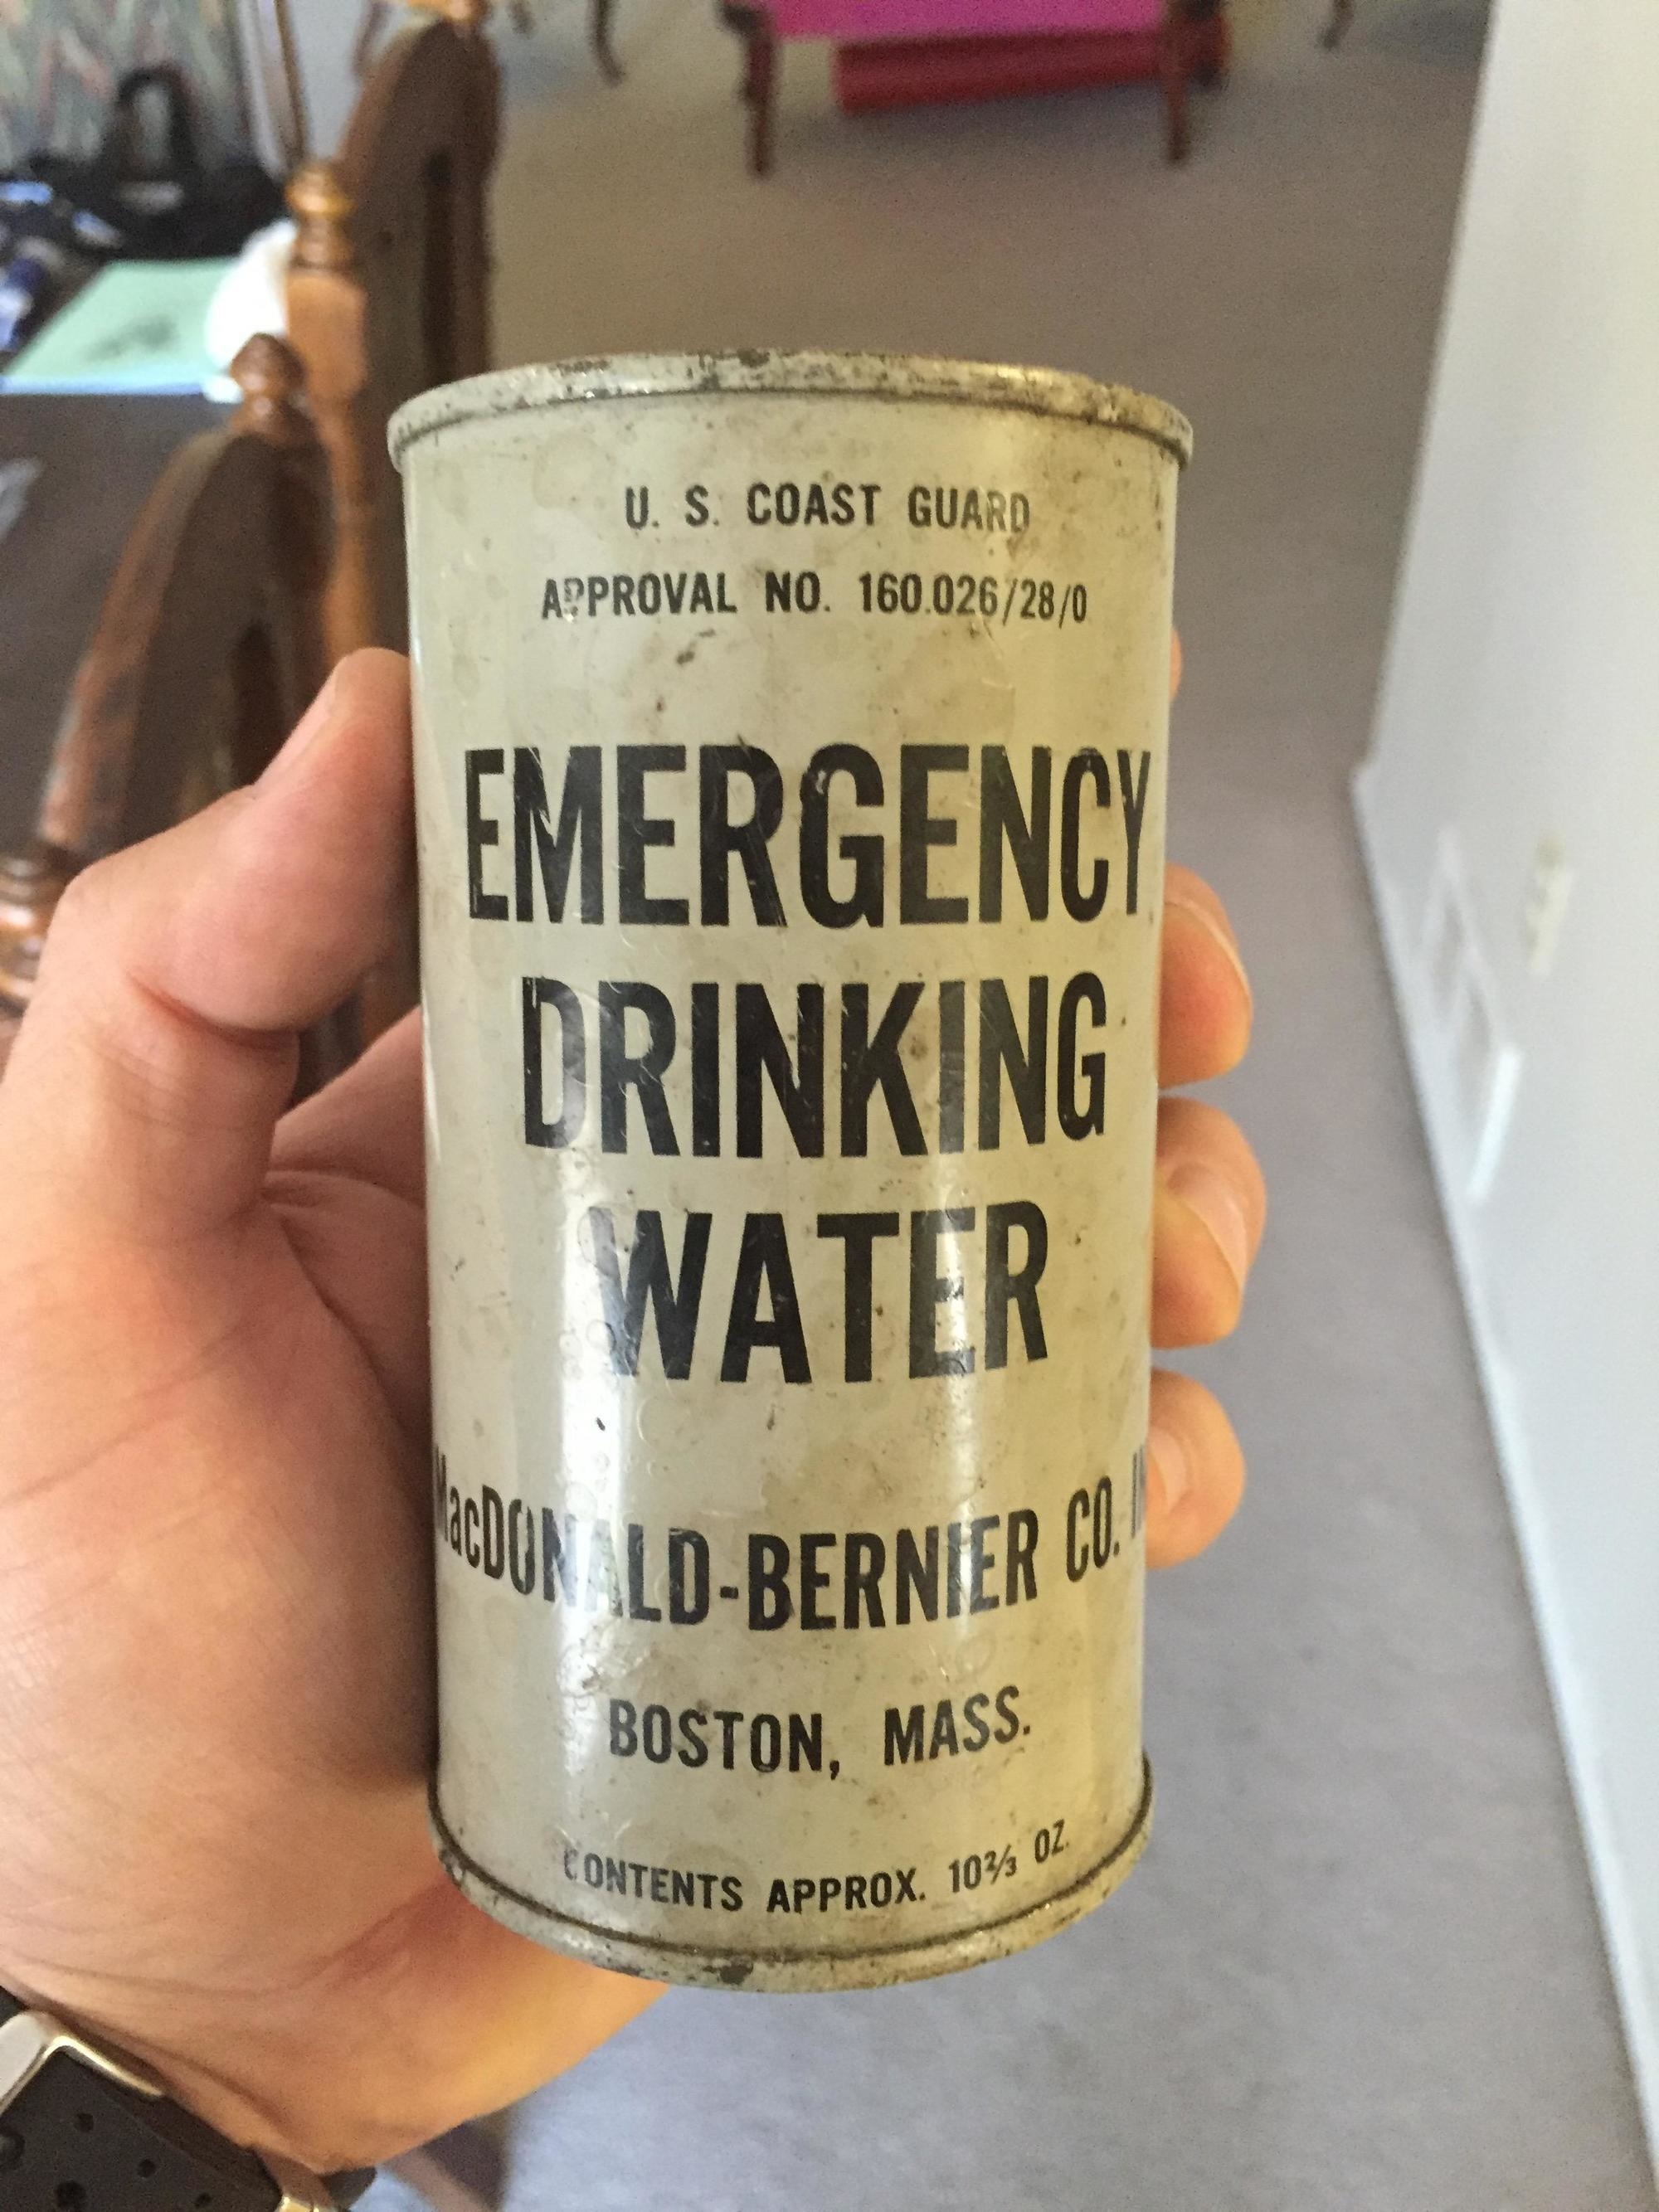 A shelter from the 1960s was discovered in a backyard.
Along with it, was this can of emergency drinking water.